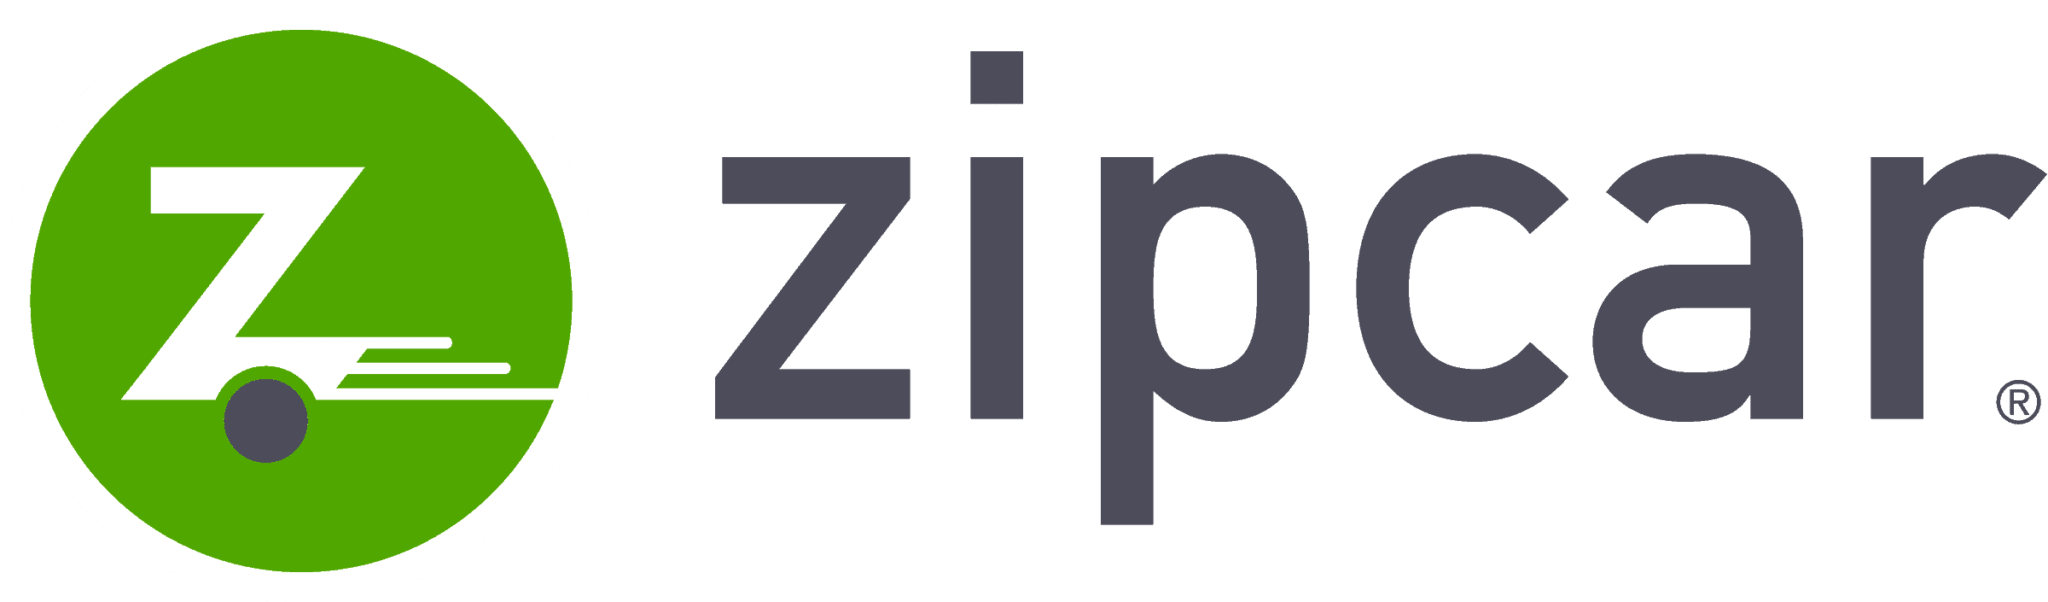 Zipcar for college students